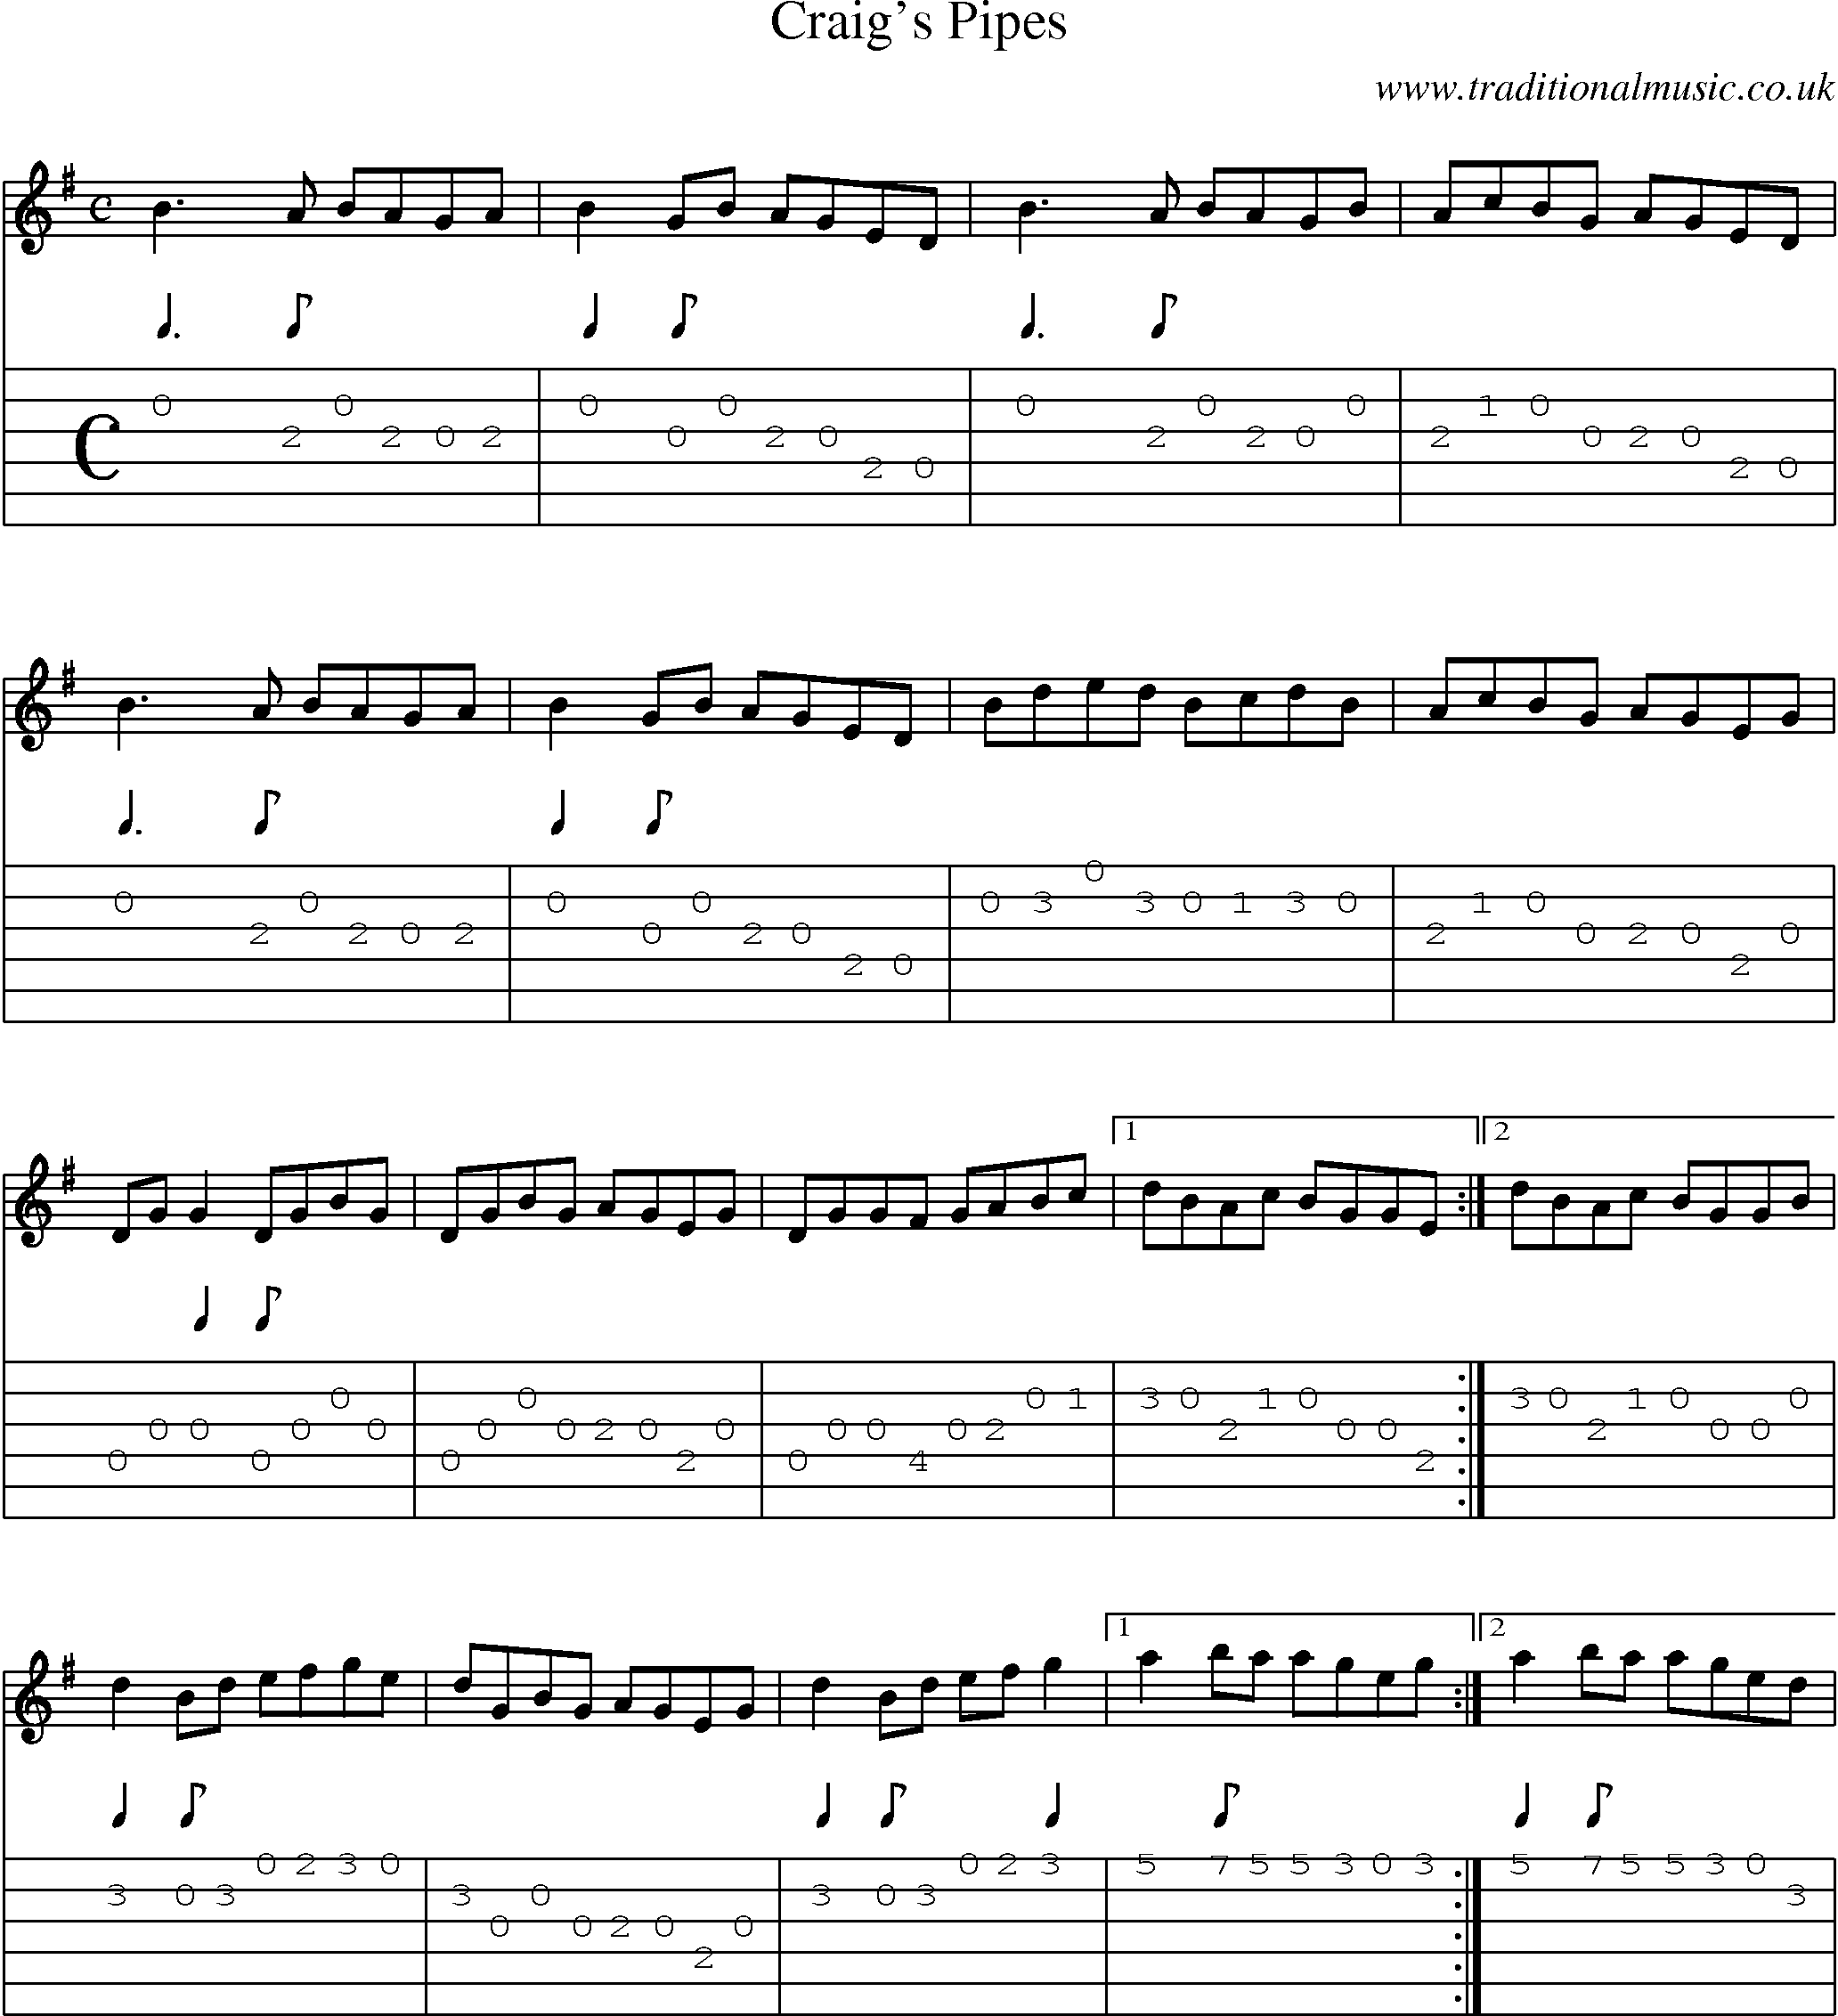 Music Score and Guitar Tabs for Craigs Pipes